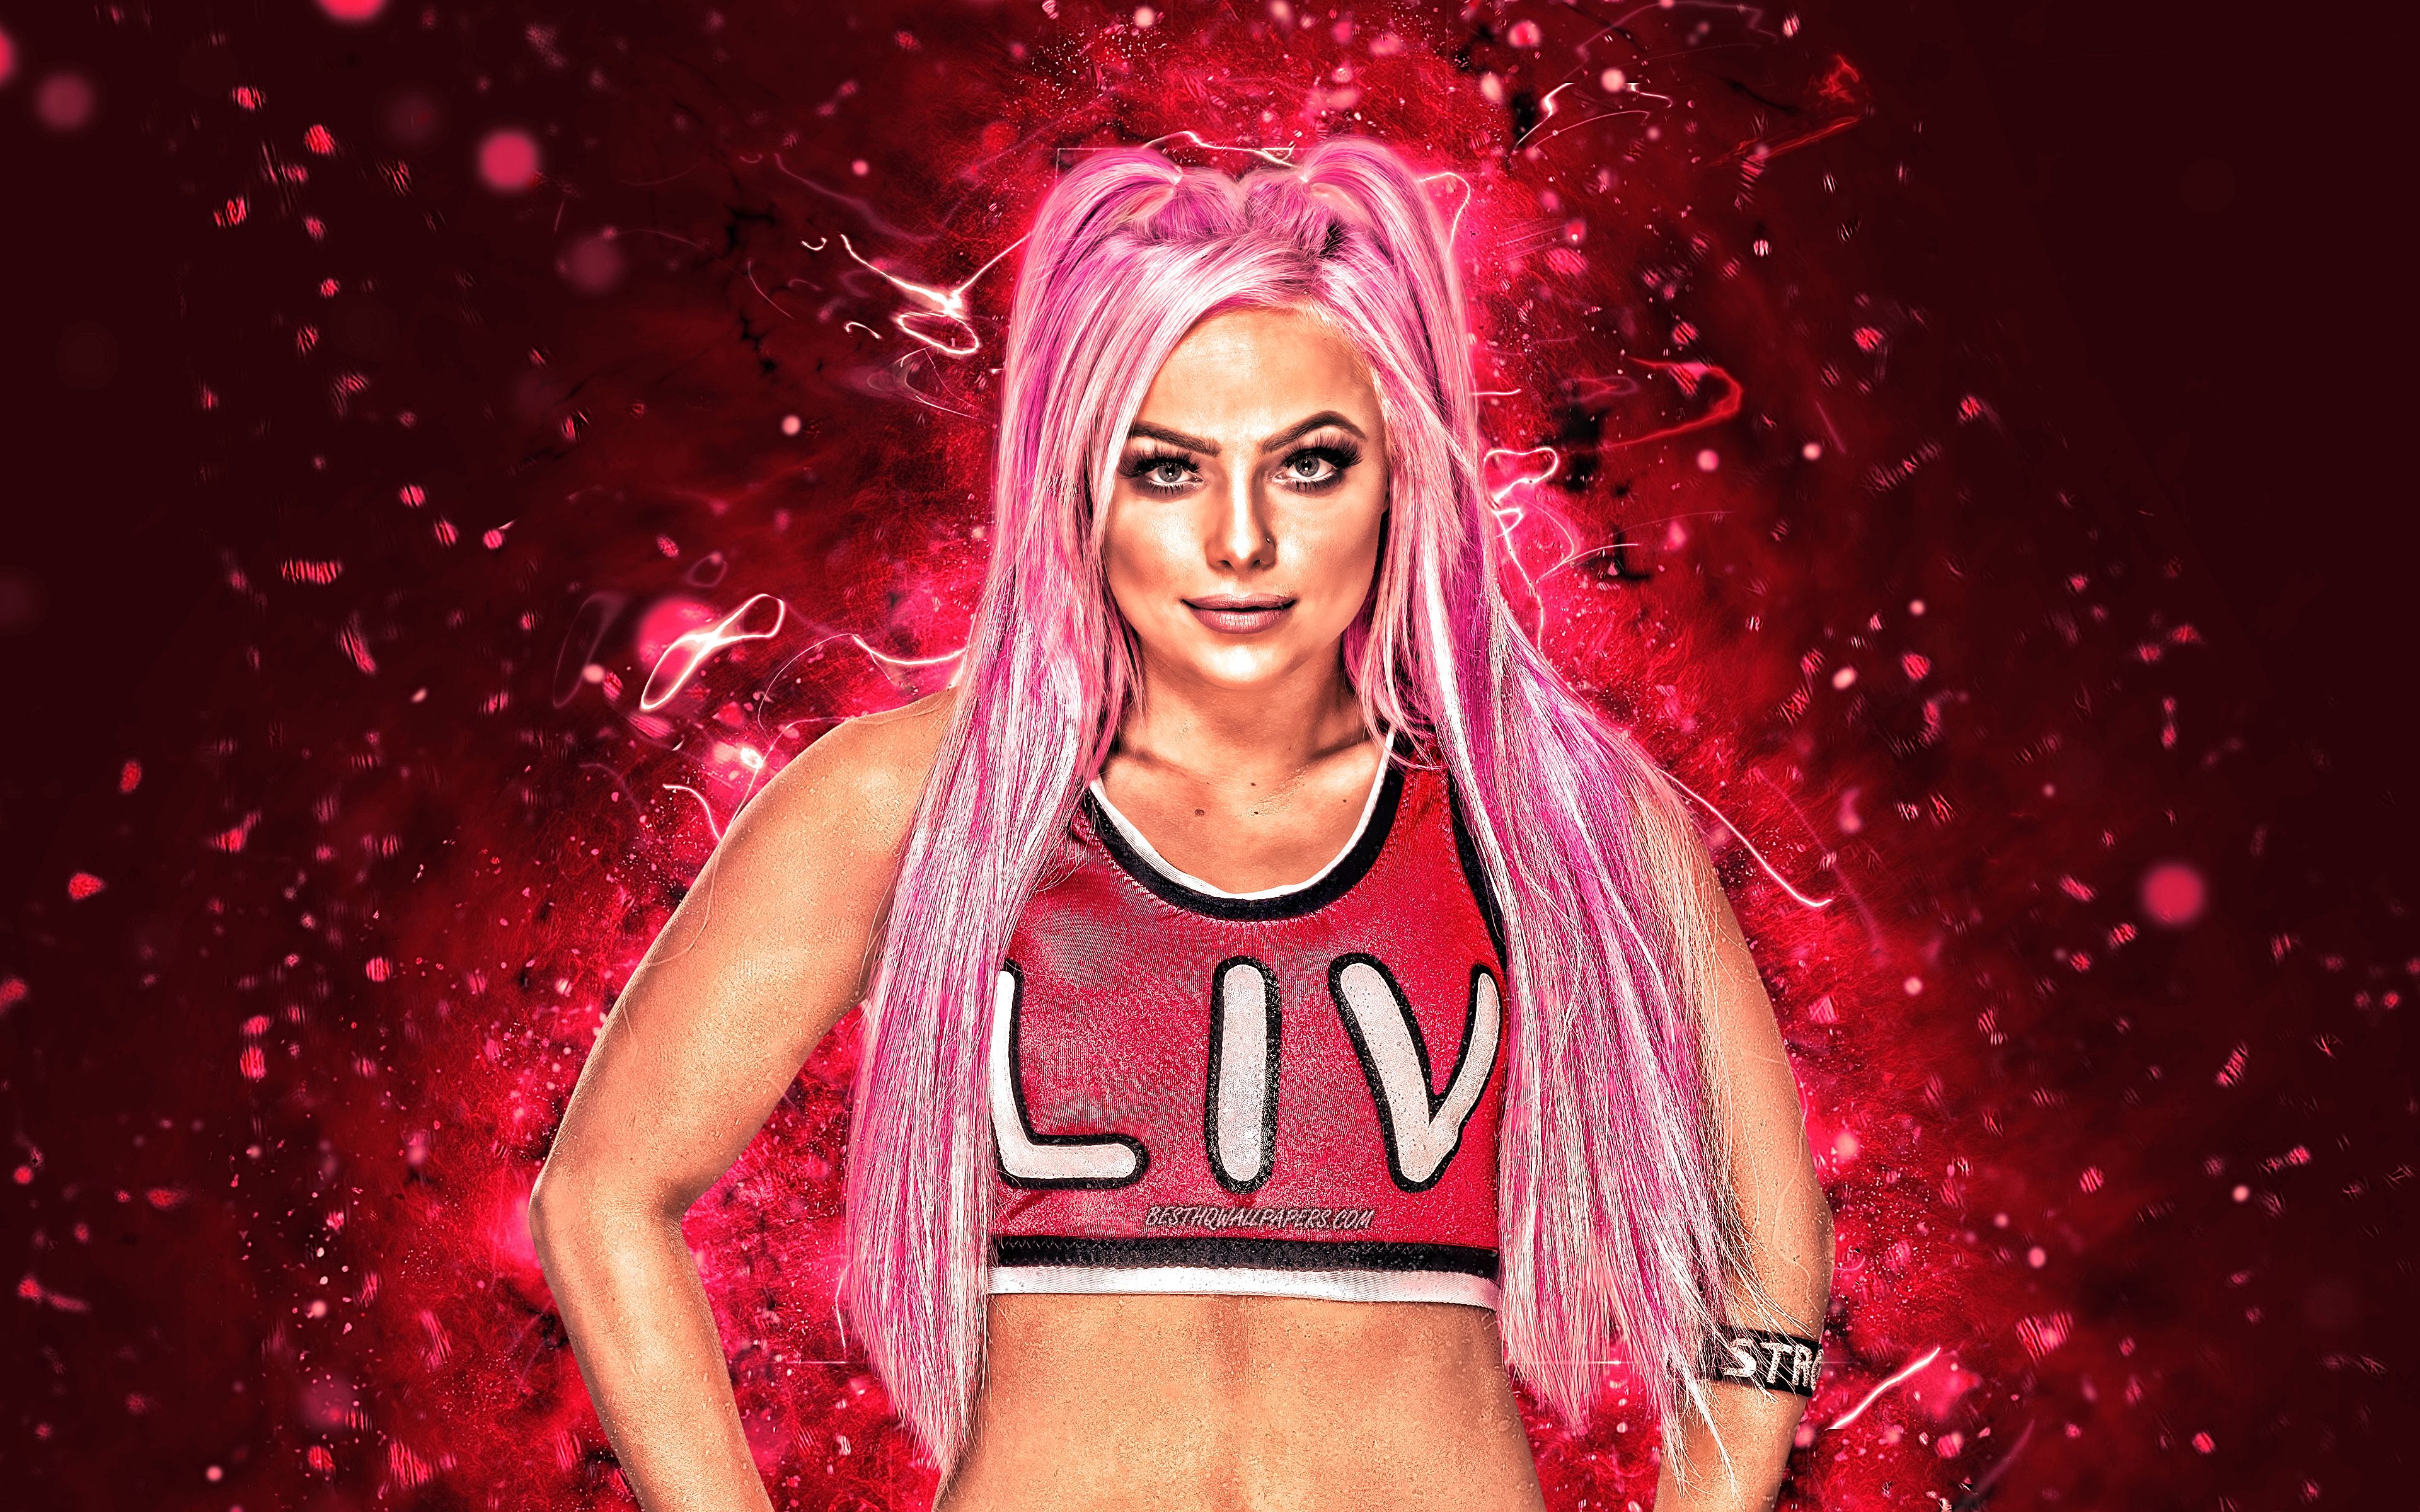 Download wallpaper Liv Morgan, 4k, american wrestlers, WWE, wrestling, neon lights, Gionna Daddio, female wrestlers, Liv Morgan 4K, wrestlers for desktop with resolution 3840x2400. High Quality HD picture wallpaper